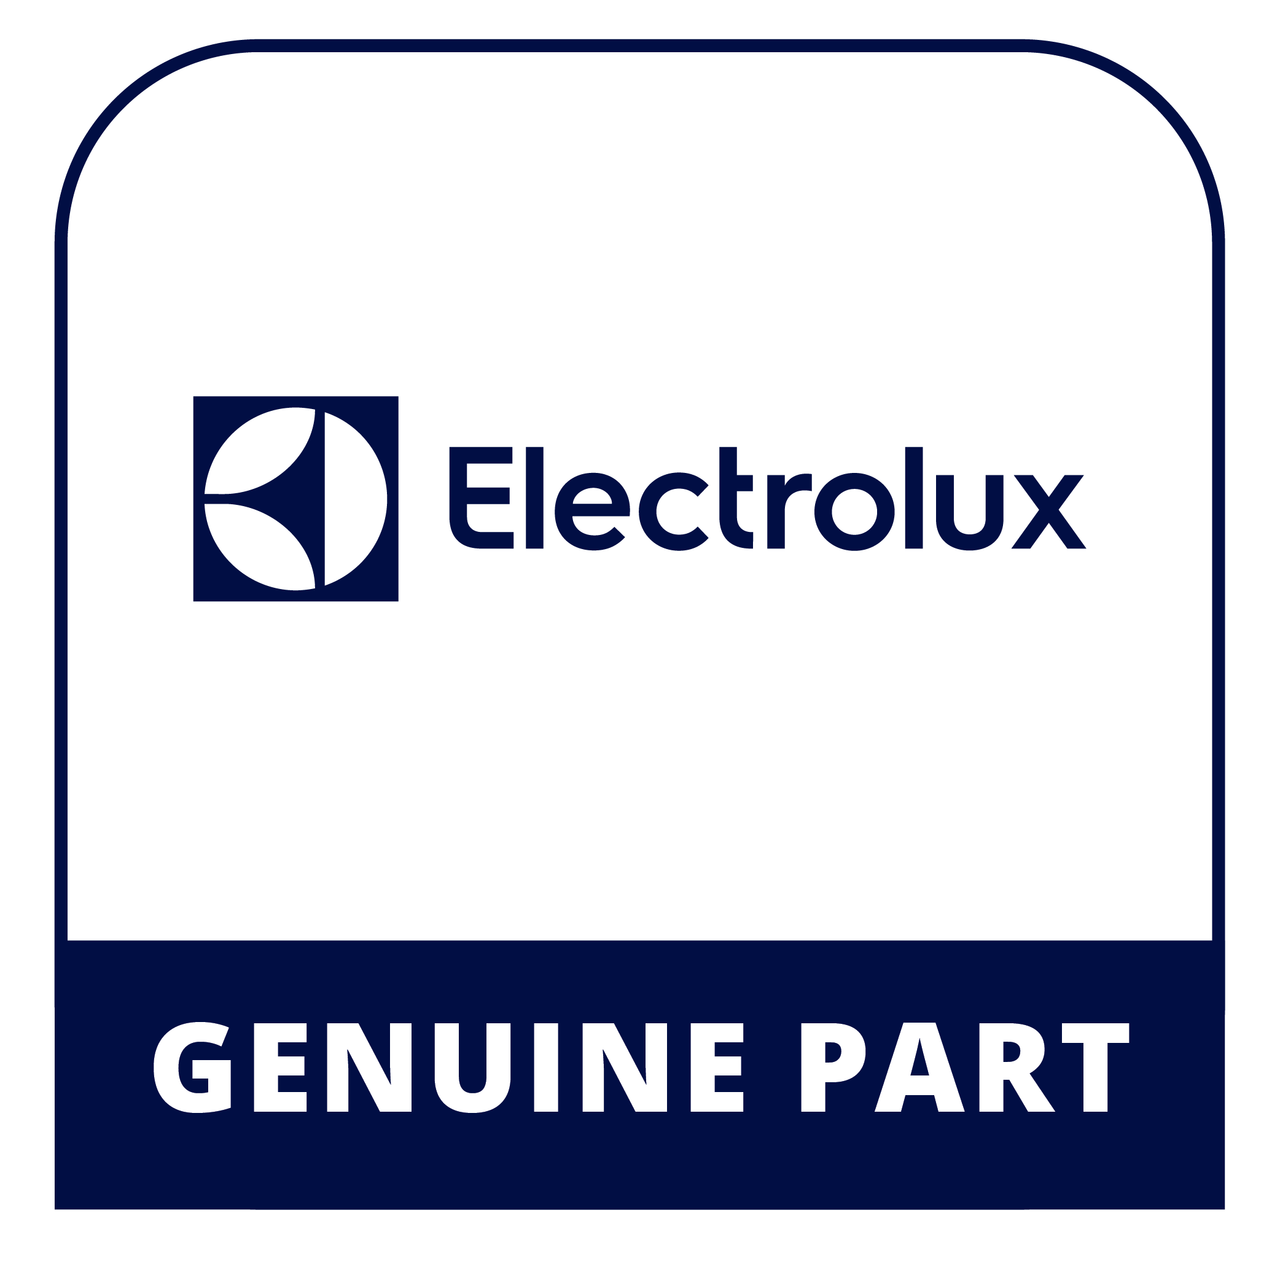 Frigidaire - Electrolux 318200446 Owners Manual - Genuine Electrolux Part